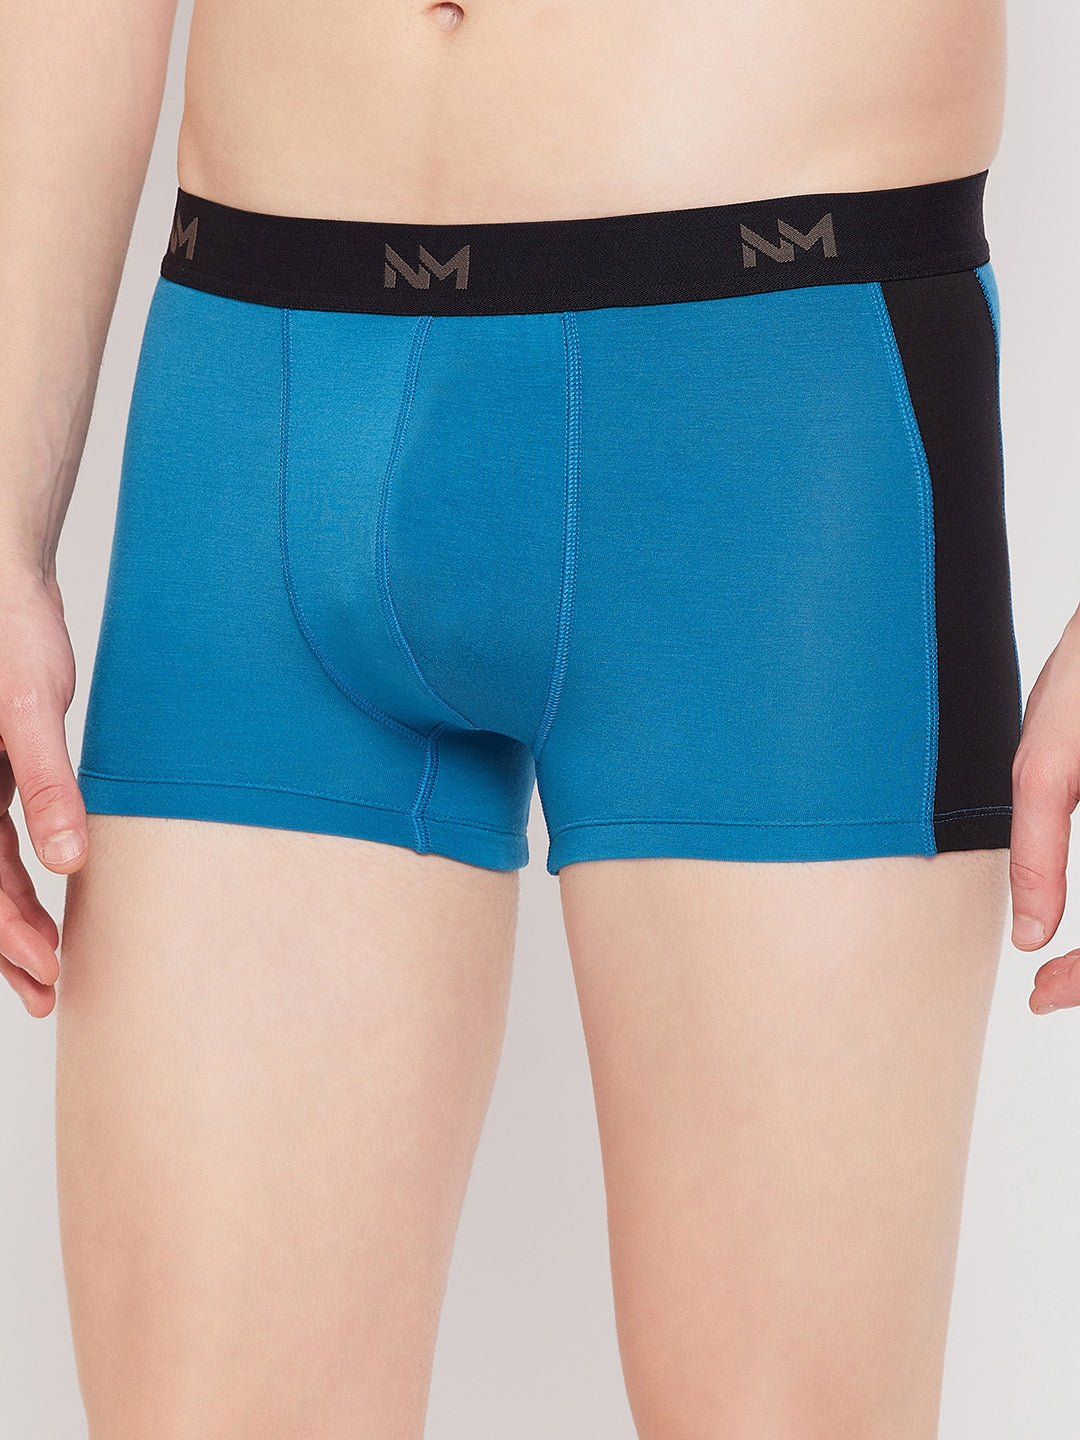 Neva Modal Solid Ultra Short Trunk Underwear for Men- Maroon, Silver Grey, Blue Collection (Pack of 3)